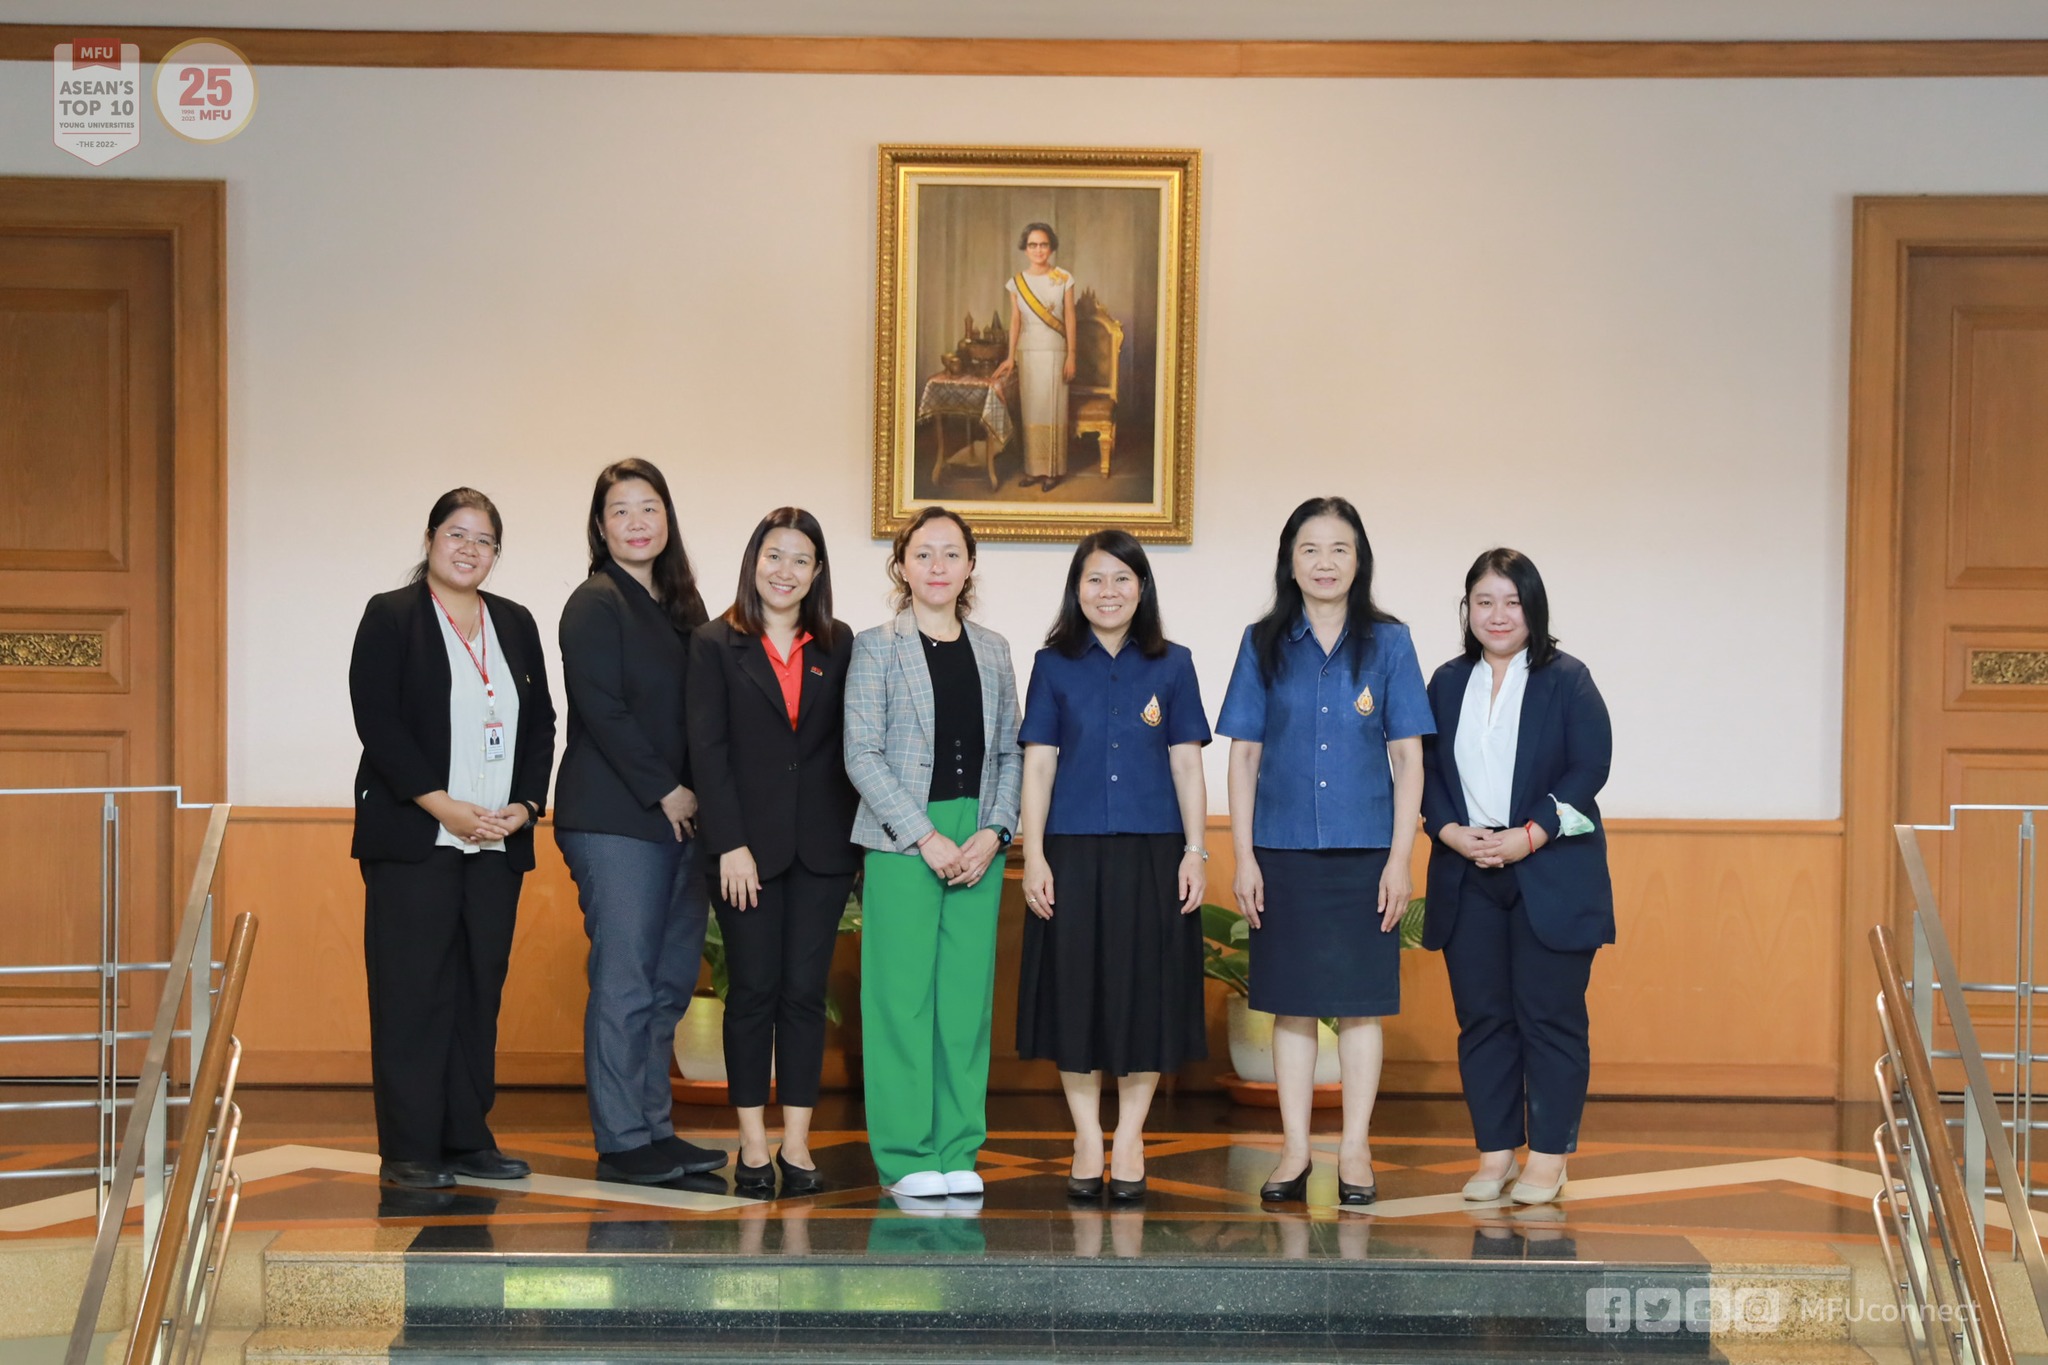 A Visit of the Delegation of the U.S. Embassy in Bangkok